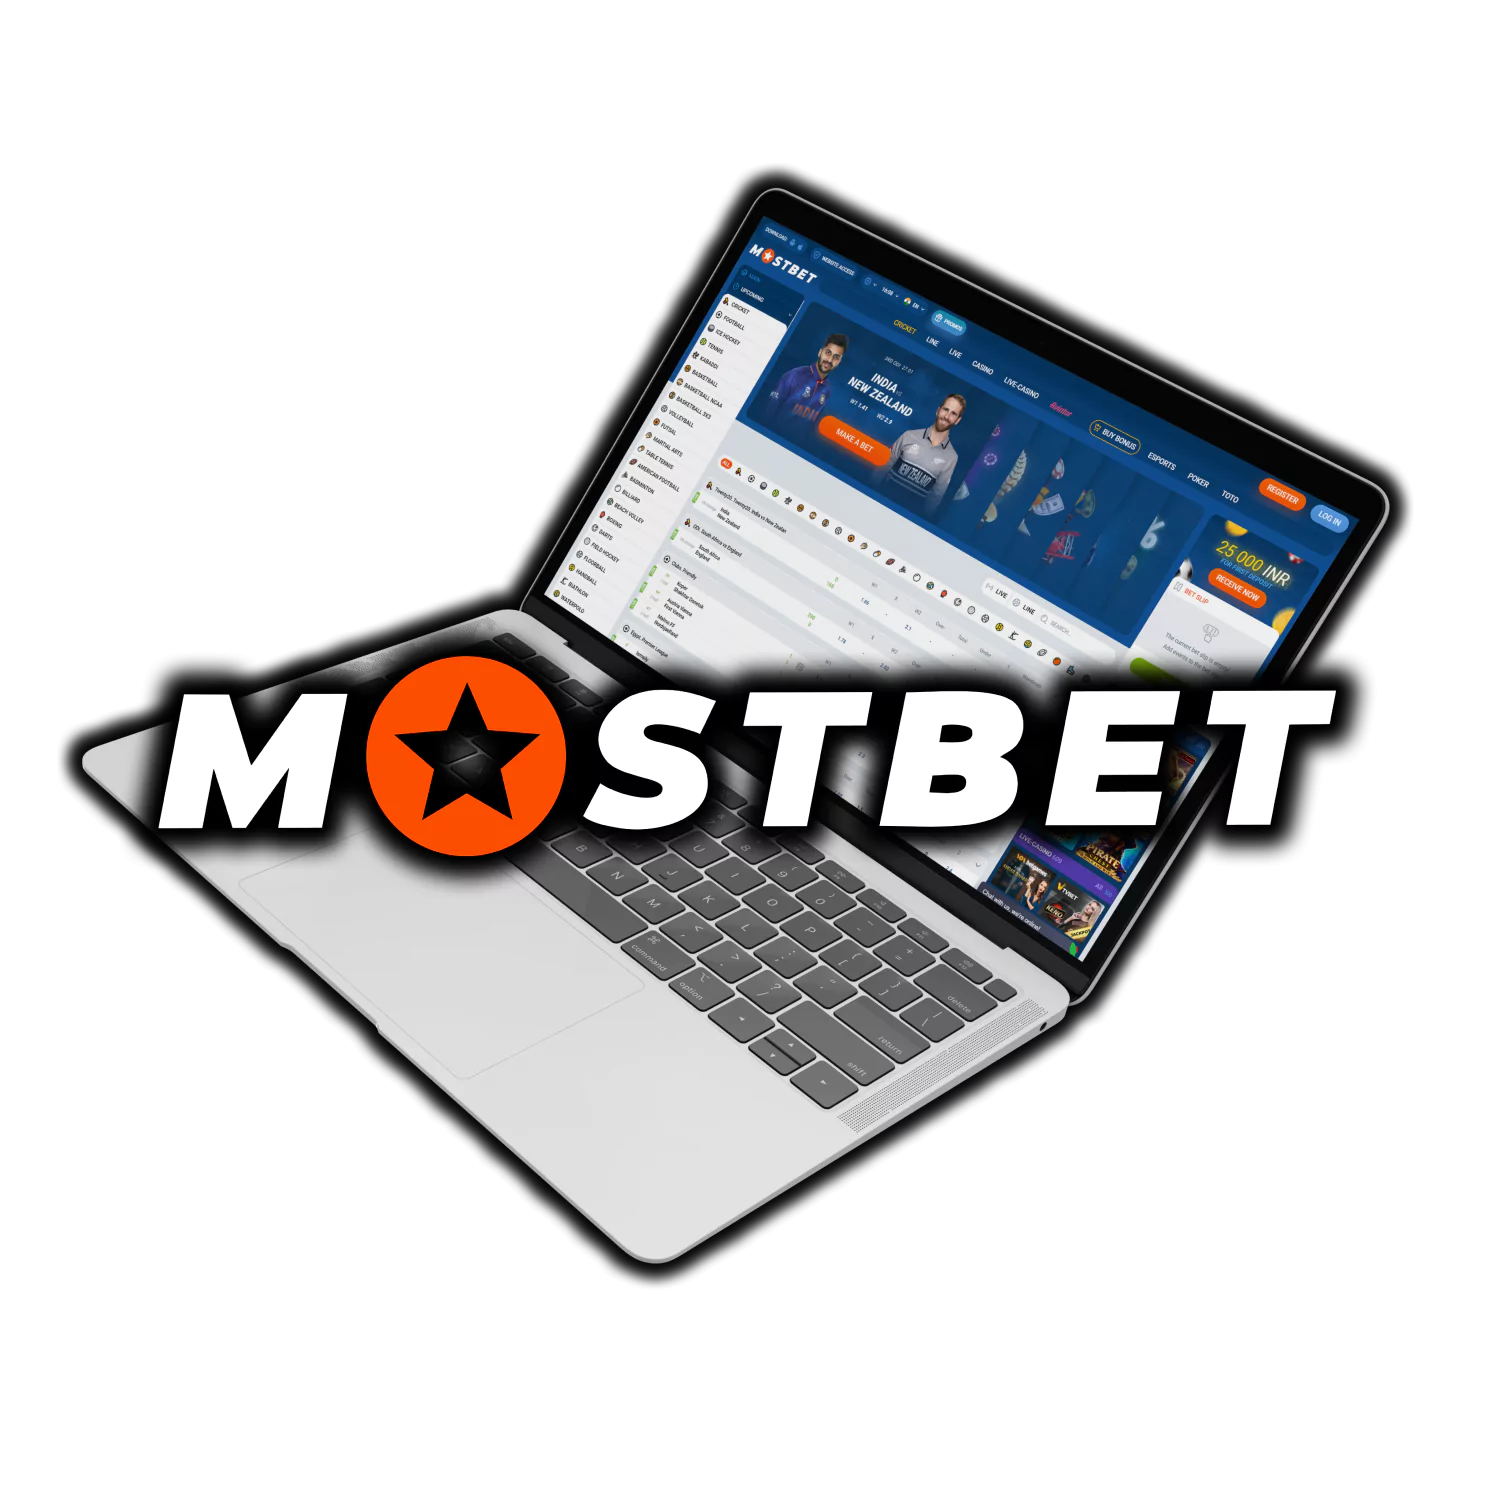 Mostbet Betting Company and Casino in Tunisia Once, Mostbet Betting Company and Casino in Tunisia Twice: 3 Reasons Why You Shouldn't Mostbet Betting Company and Casino in Tunisia The Third Time